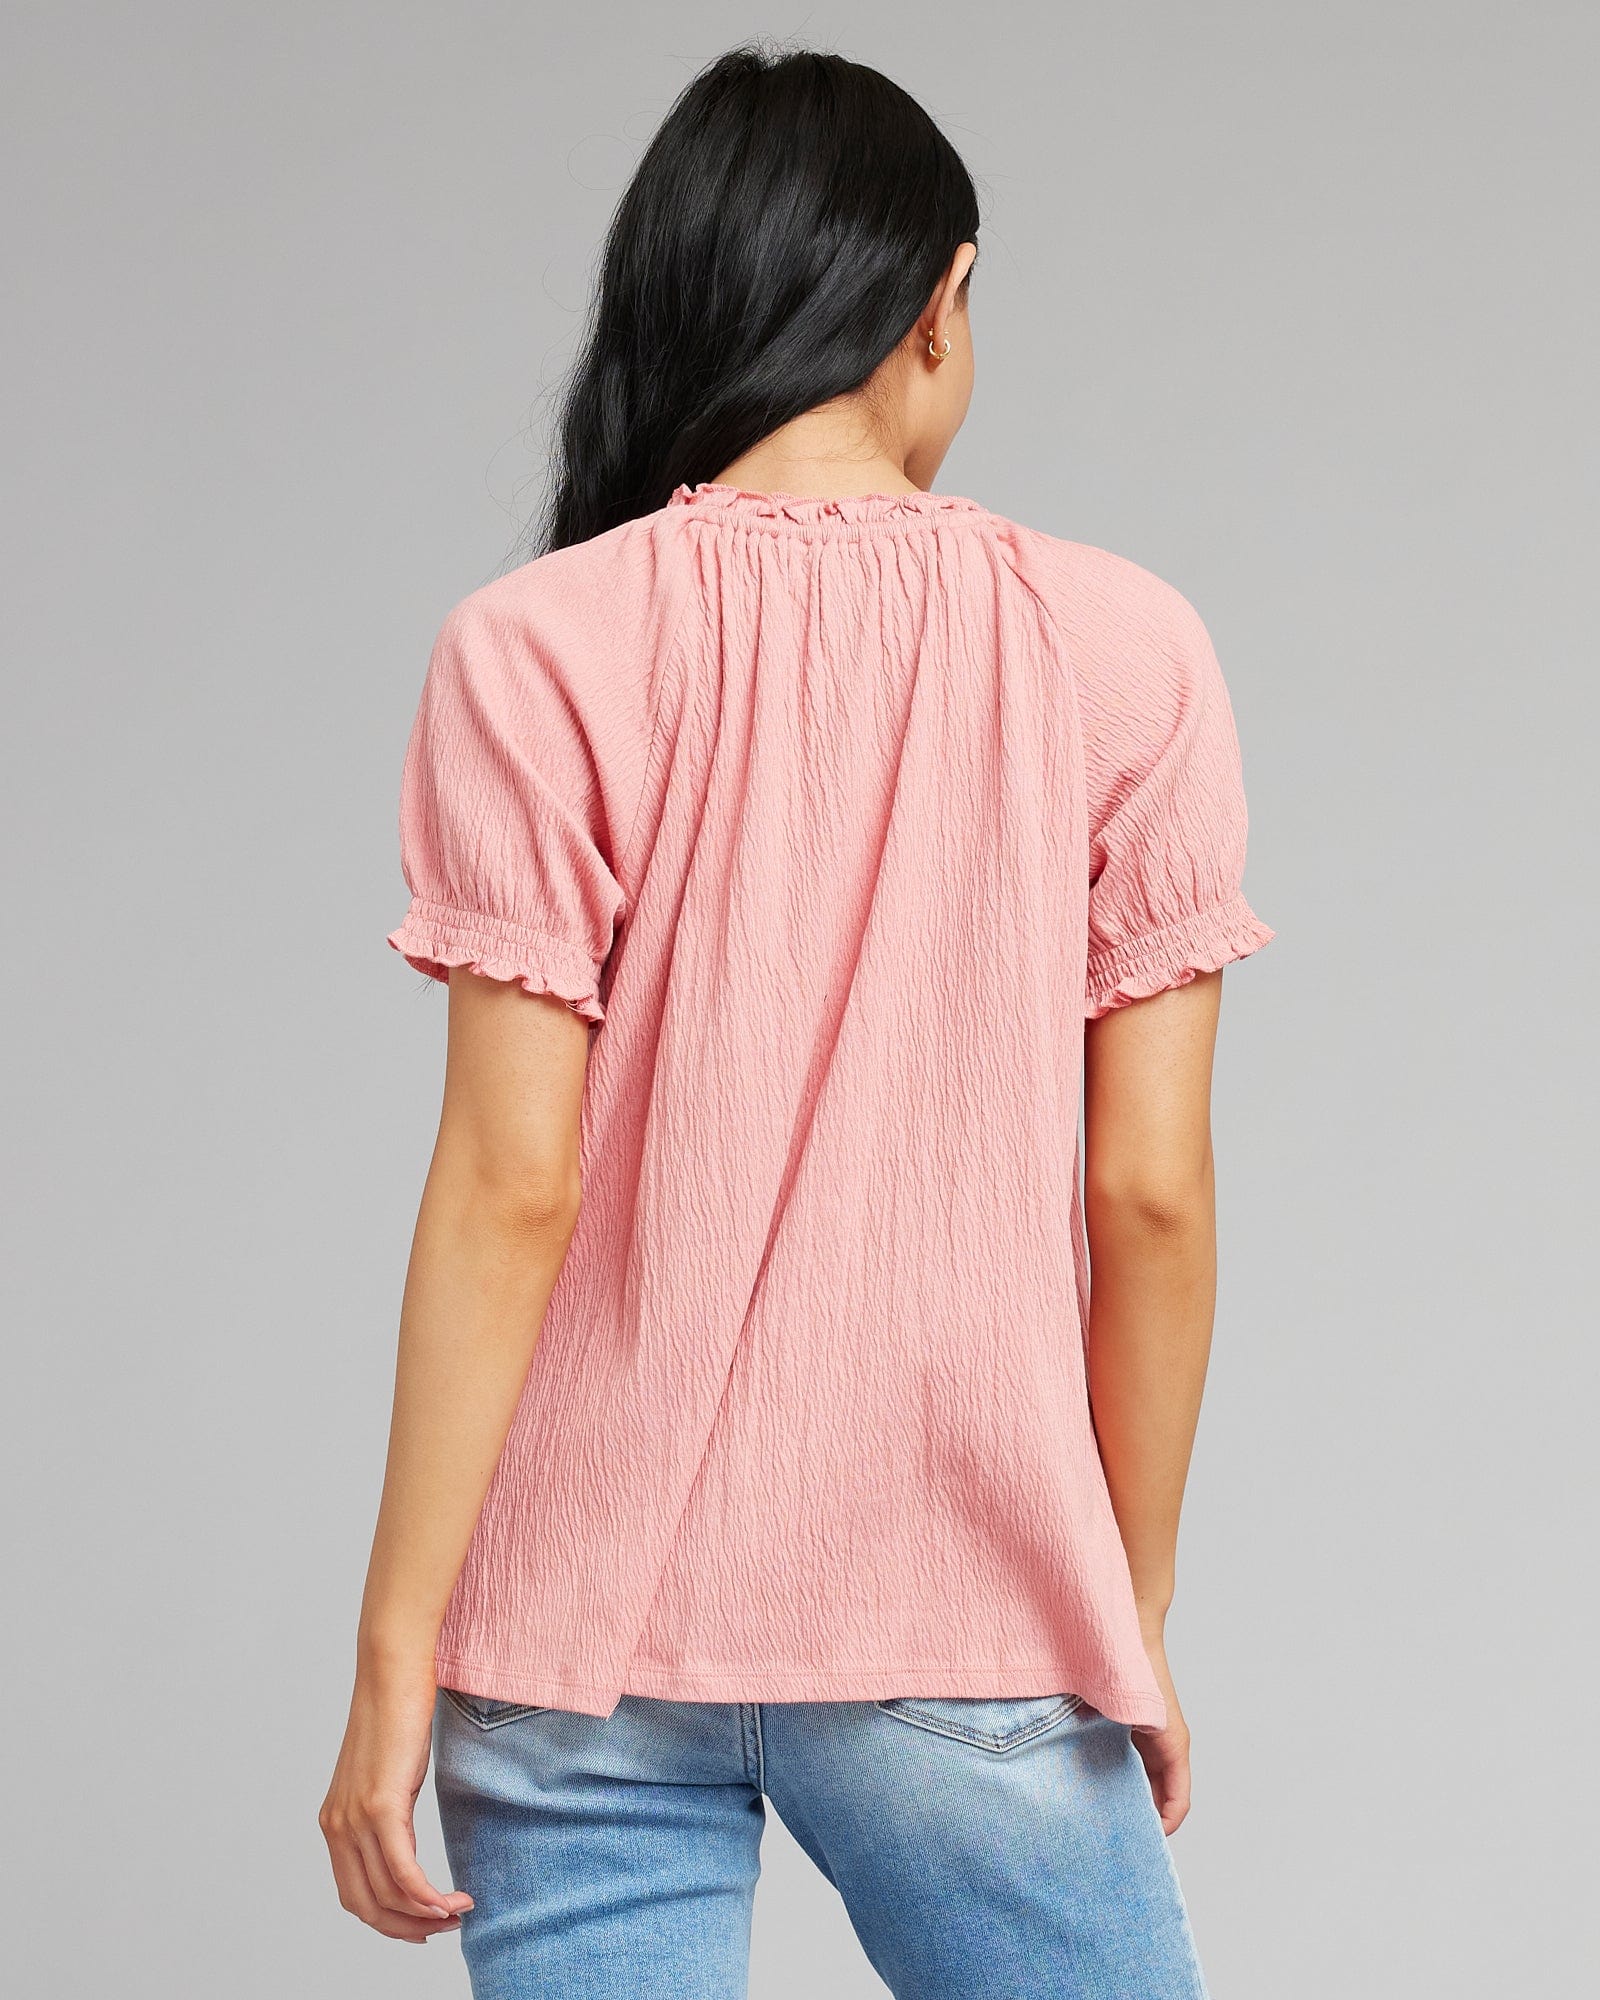 Women in a pink short sleeve blouse with tassels at neckline